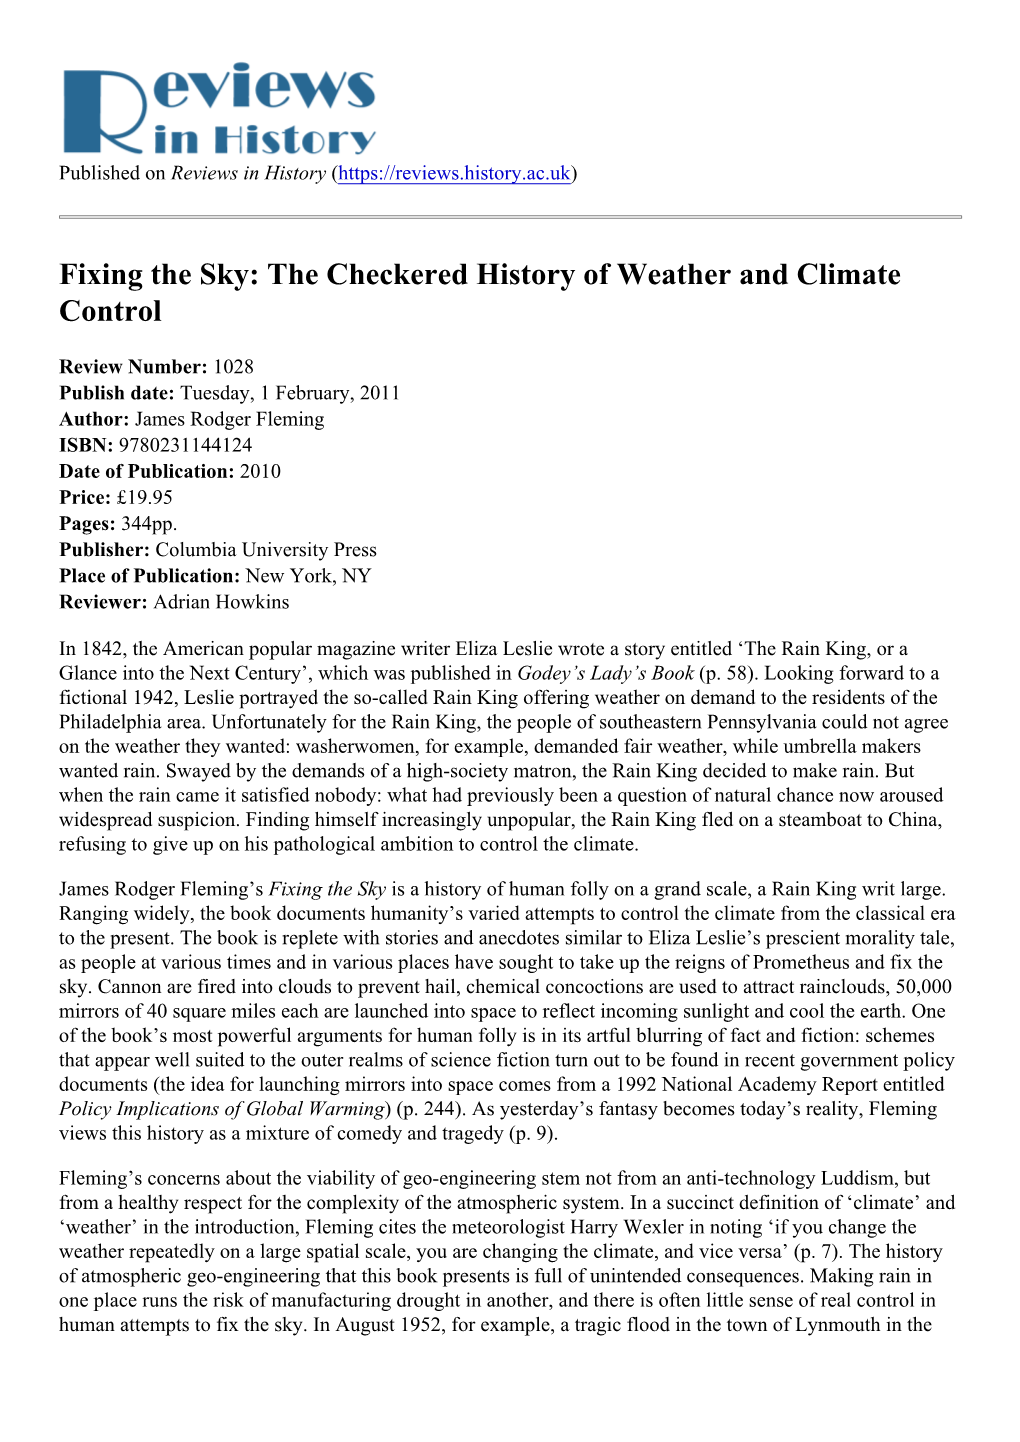 Fixing the Sky: the Checkered History of Weather and Climate Control